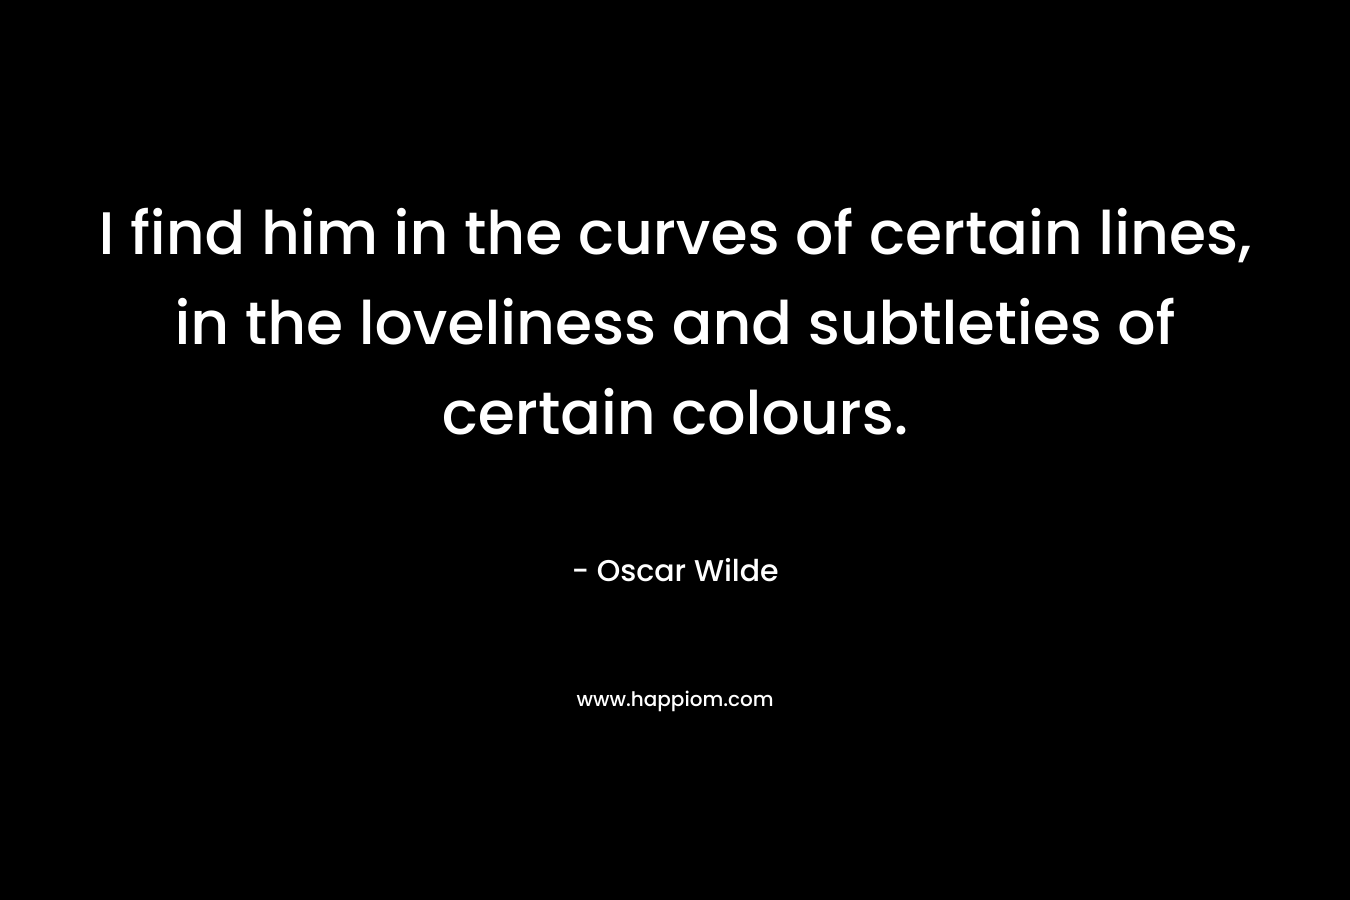 I find him in the curves of certain lines, in the loveliness and subtleties of certain colours.